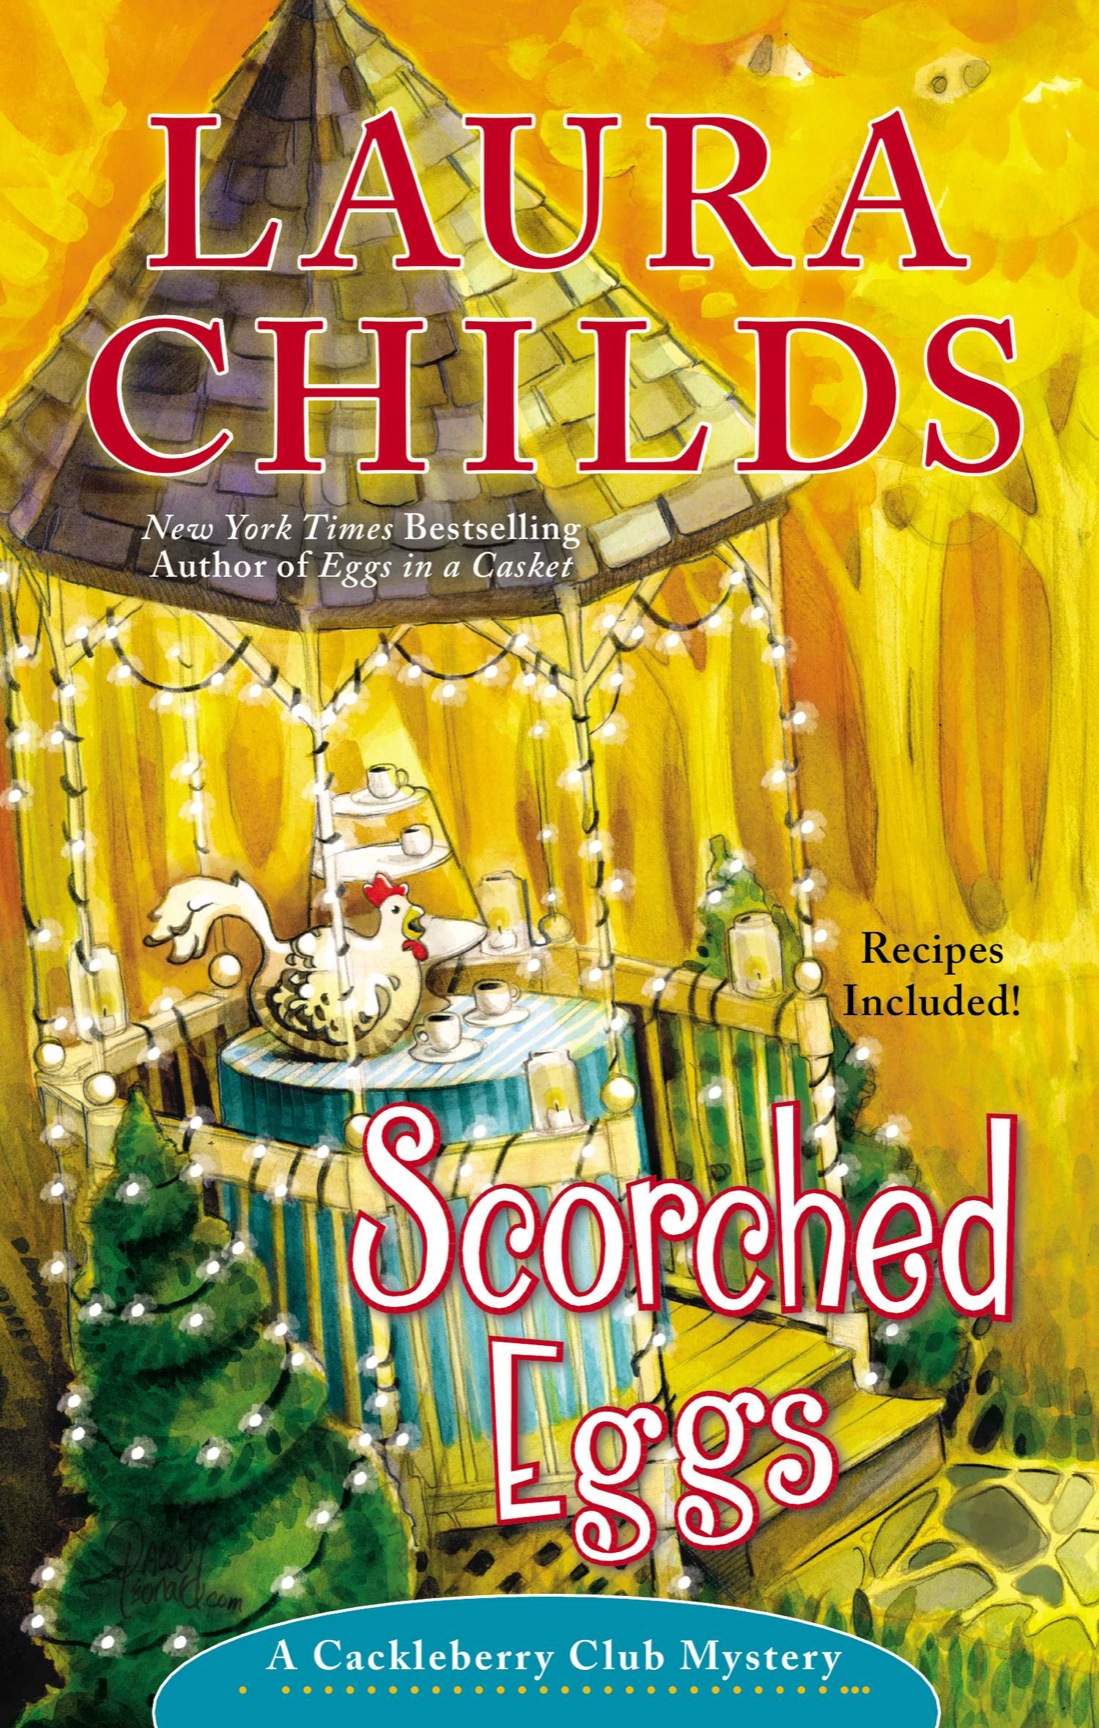 Scorched Eggs (2014) by Laura Childs